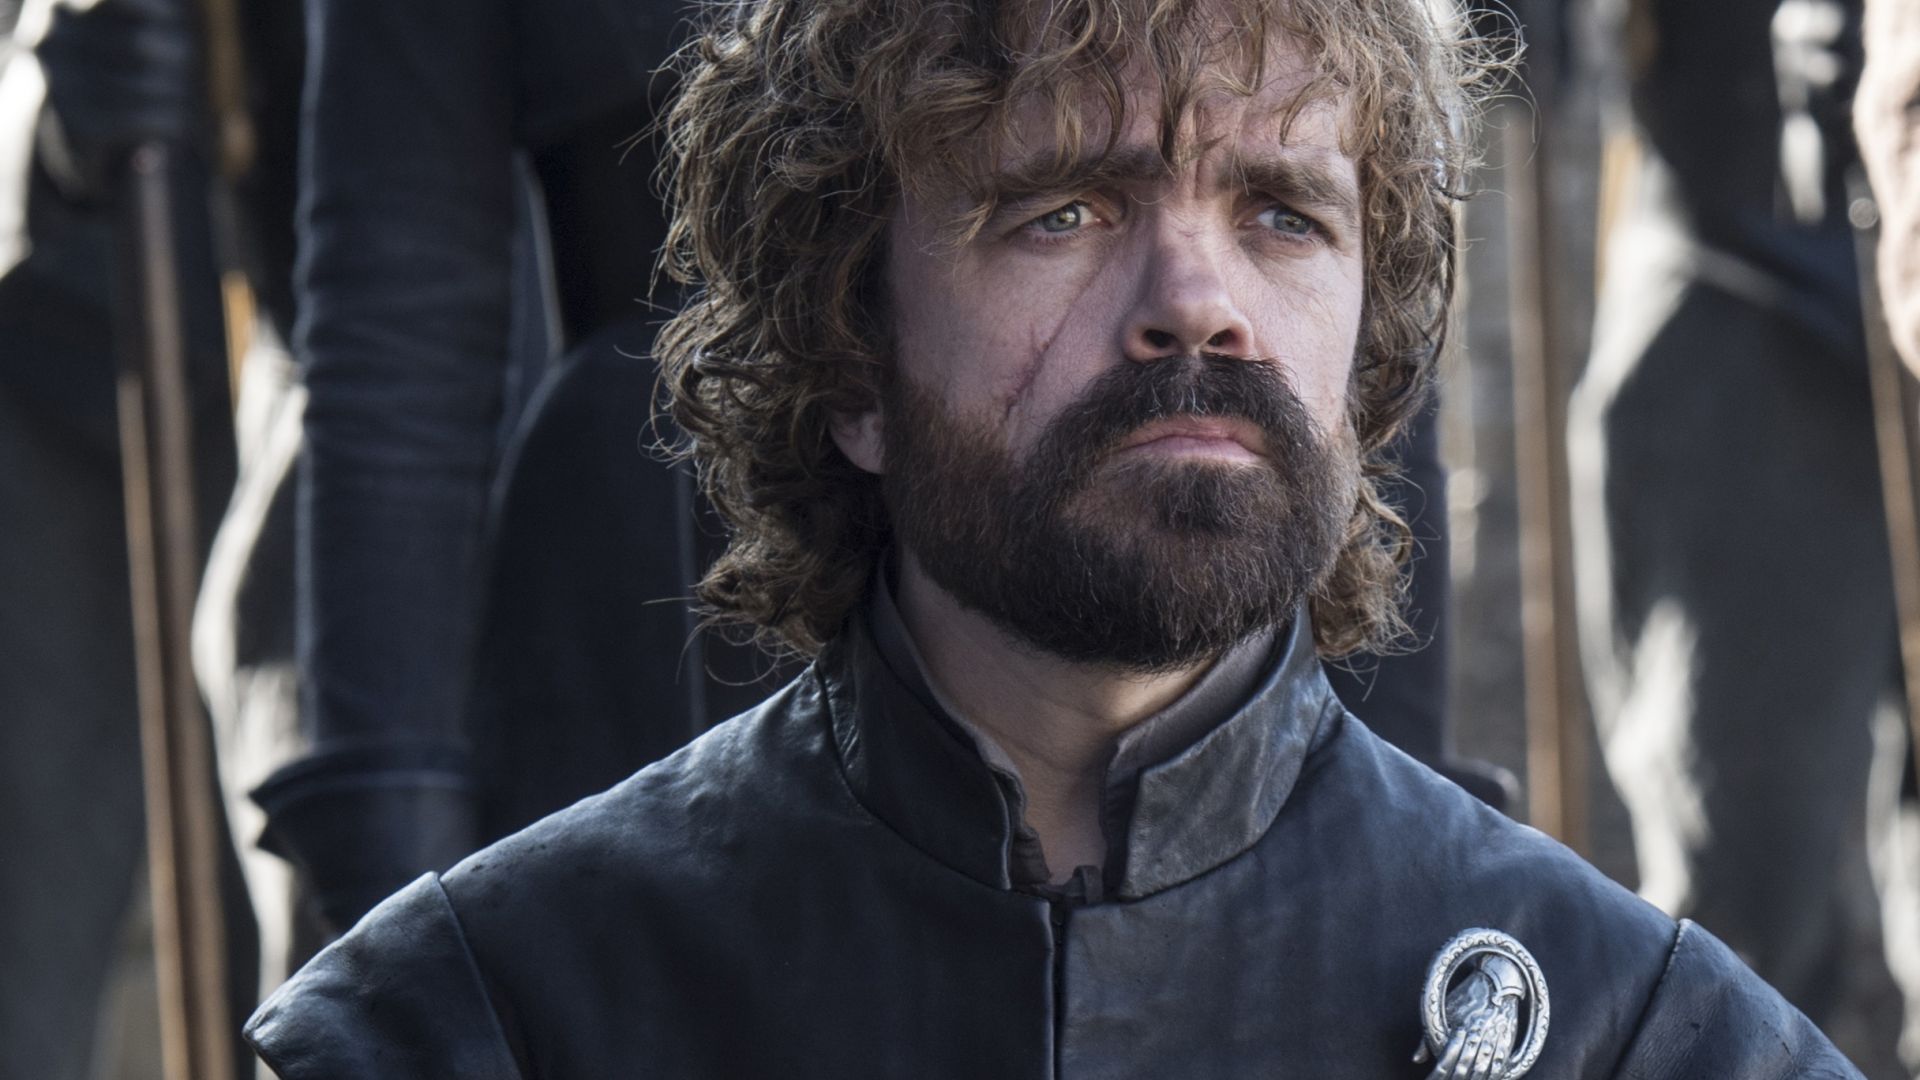 Wallpaper Game of Thrones, Peter Dinklage, Tyrion Lannister, TV show